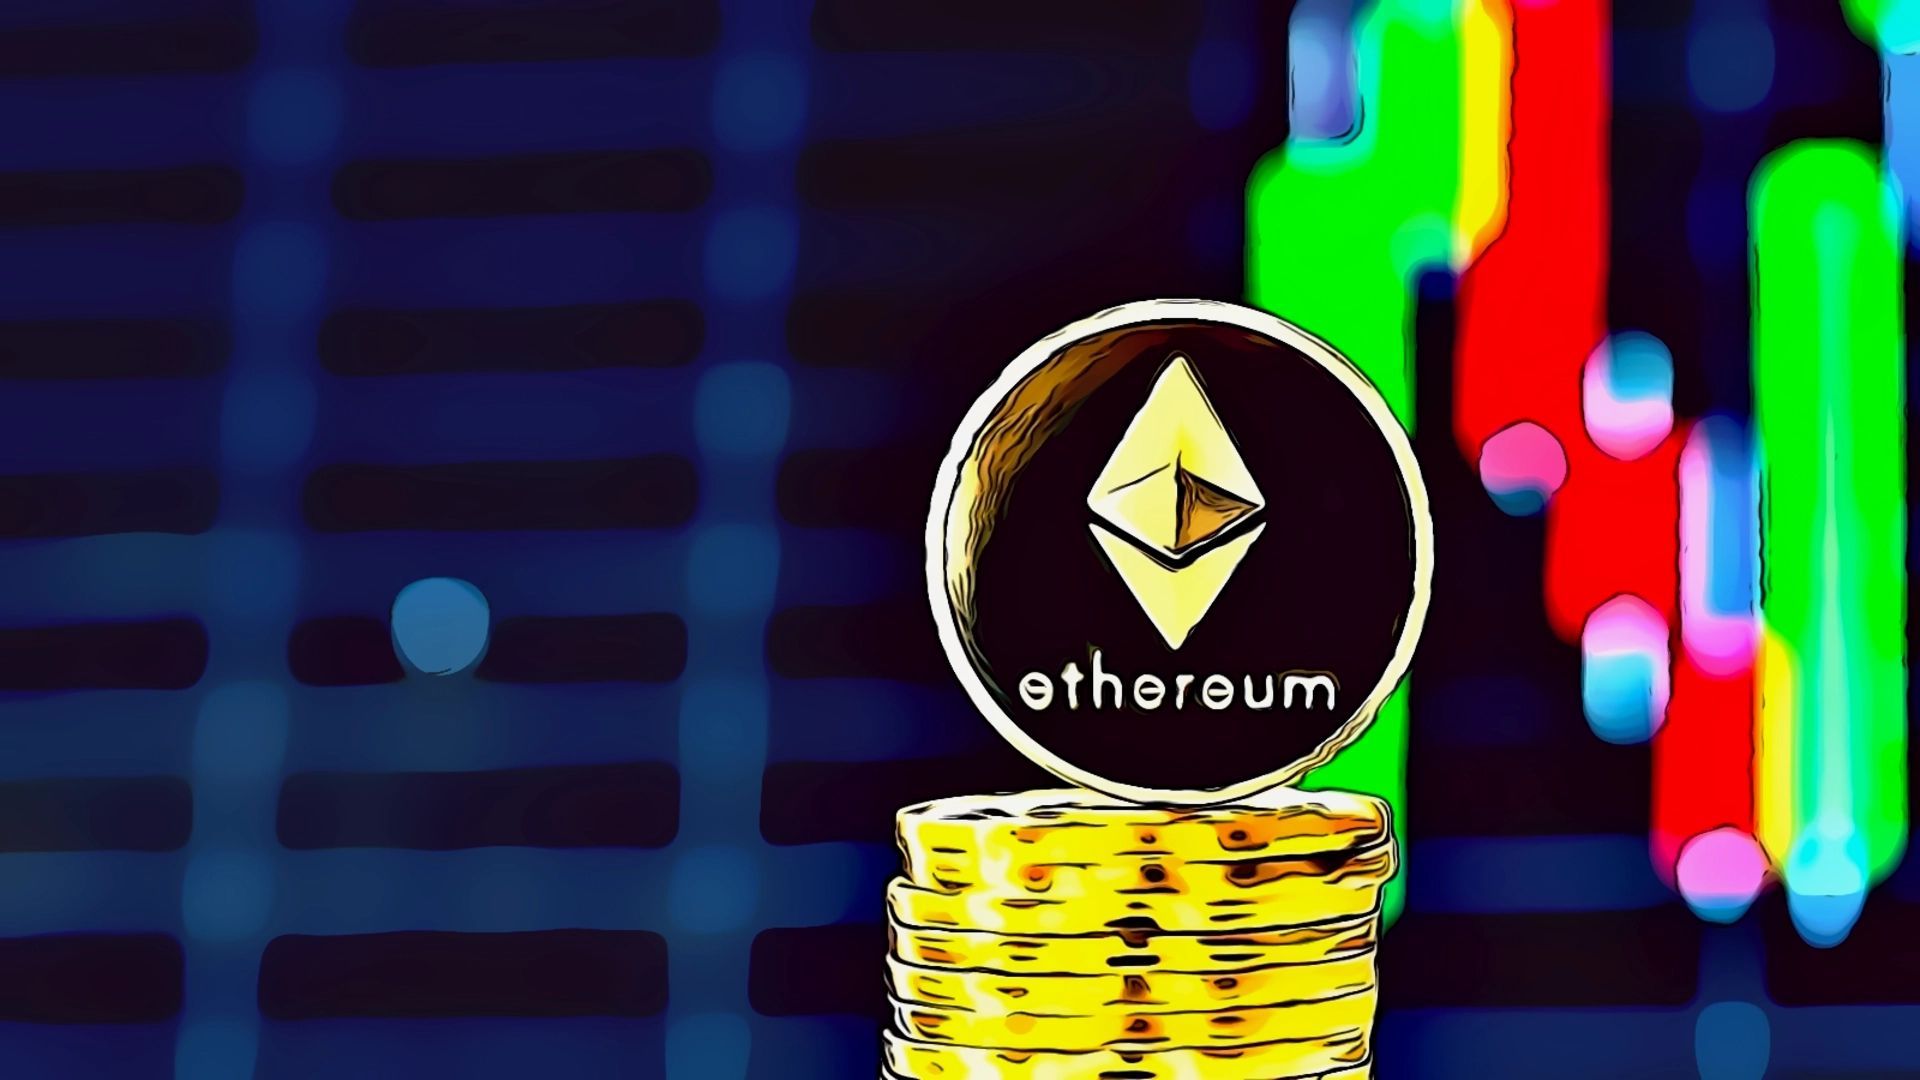 Ethereum Price Analysis & Prediction (March 7th) – ETH Faces Crucial Support After 5% Falls, Can it Breakthrough?